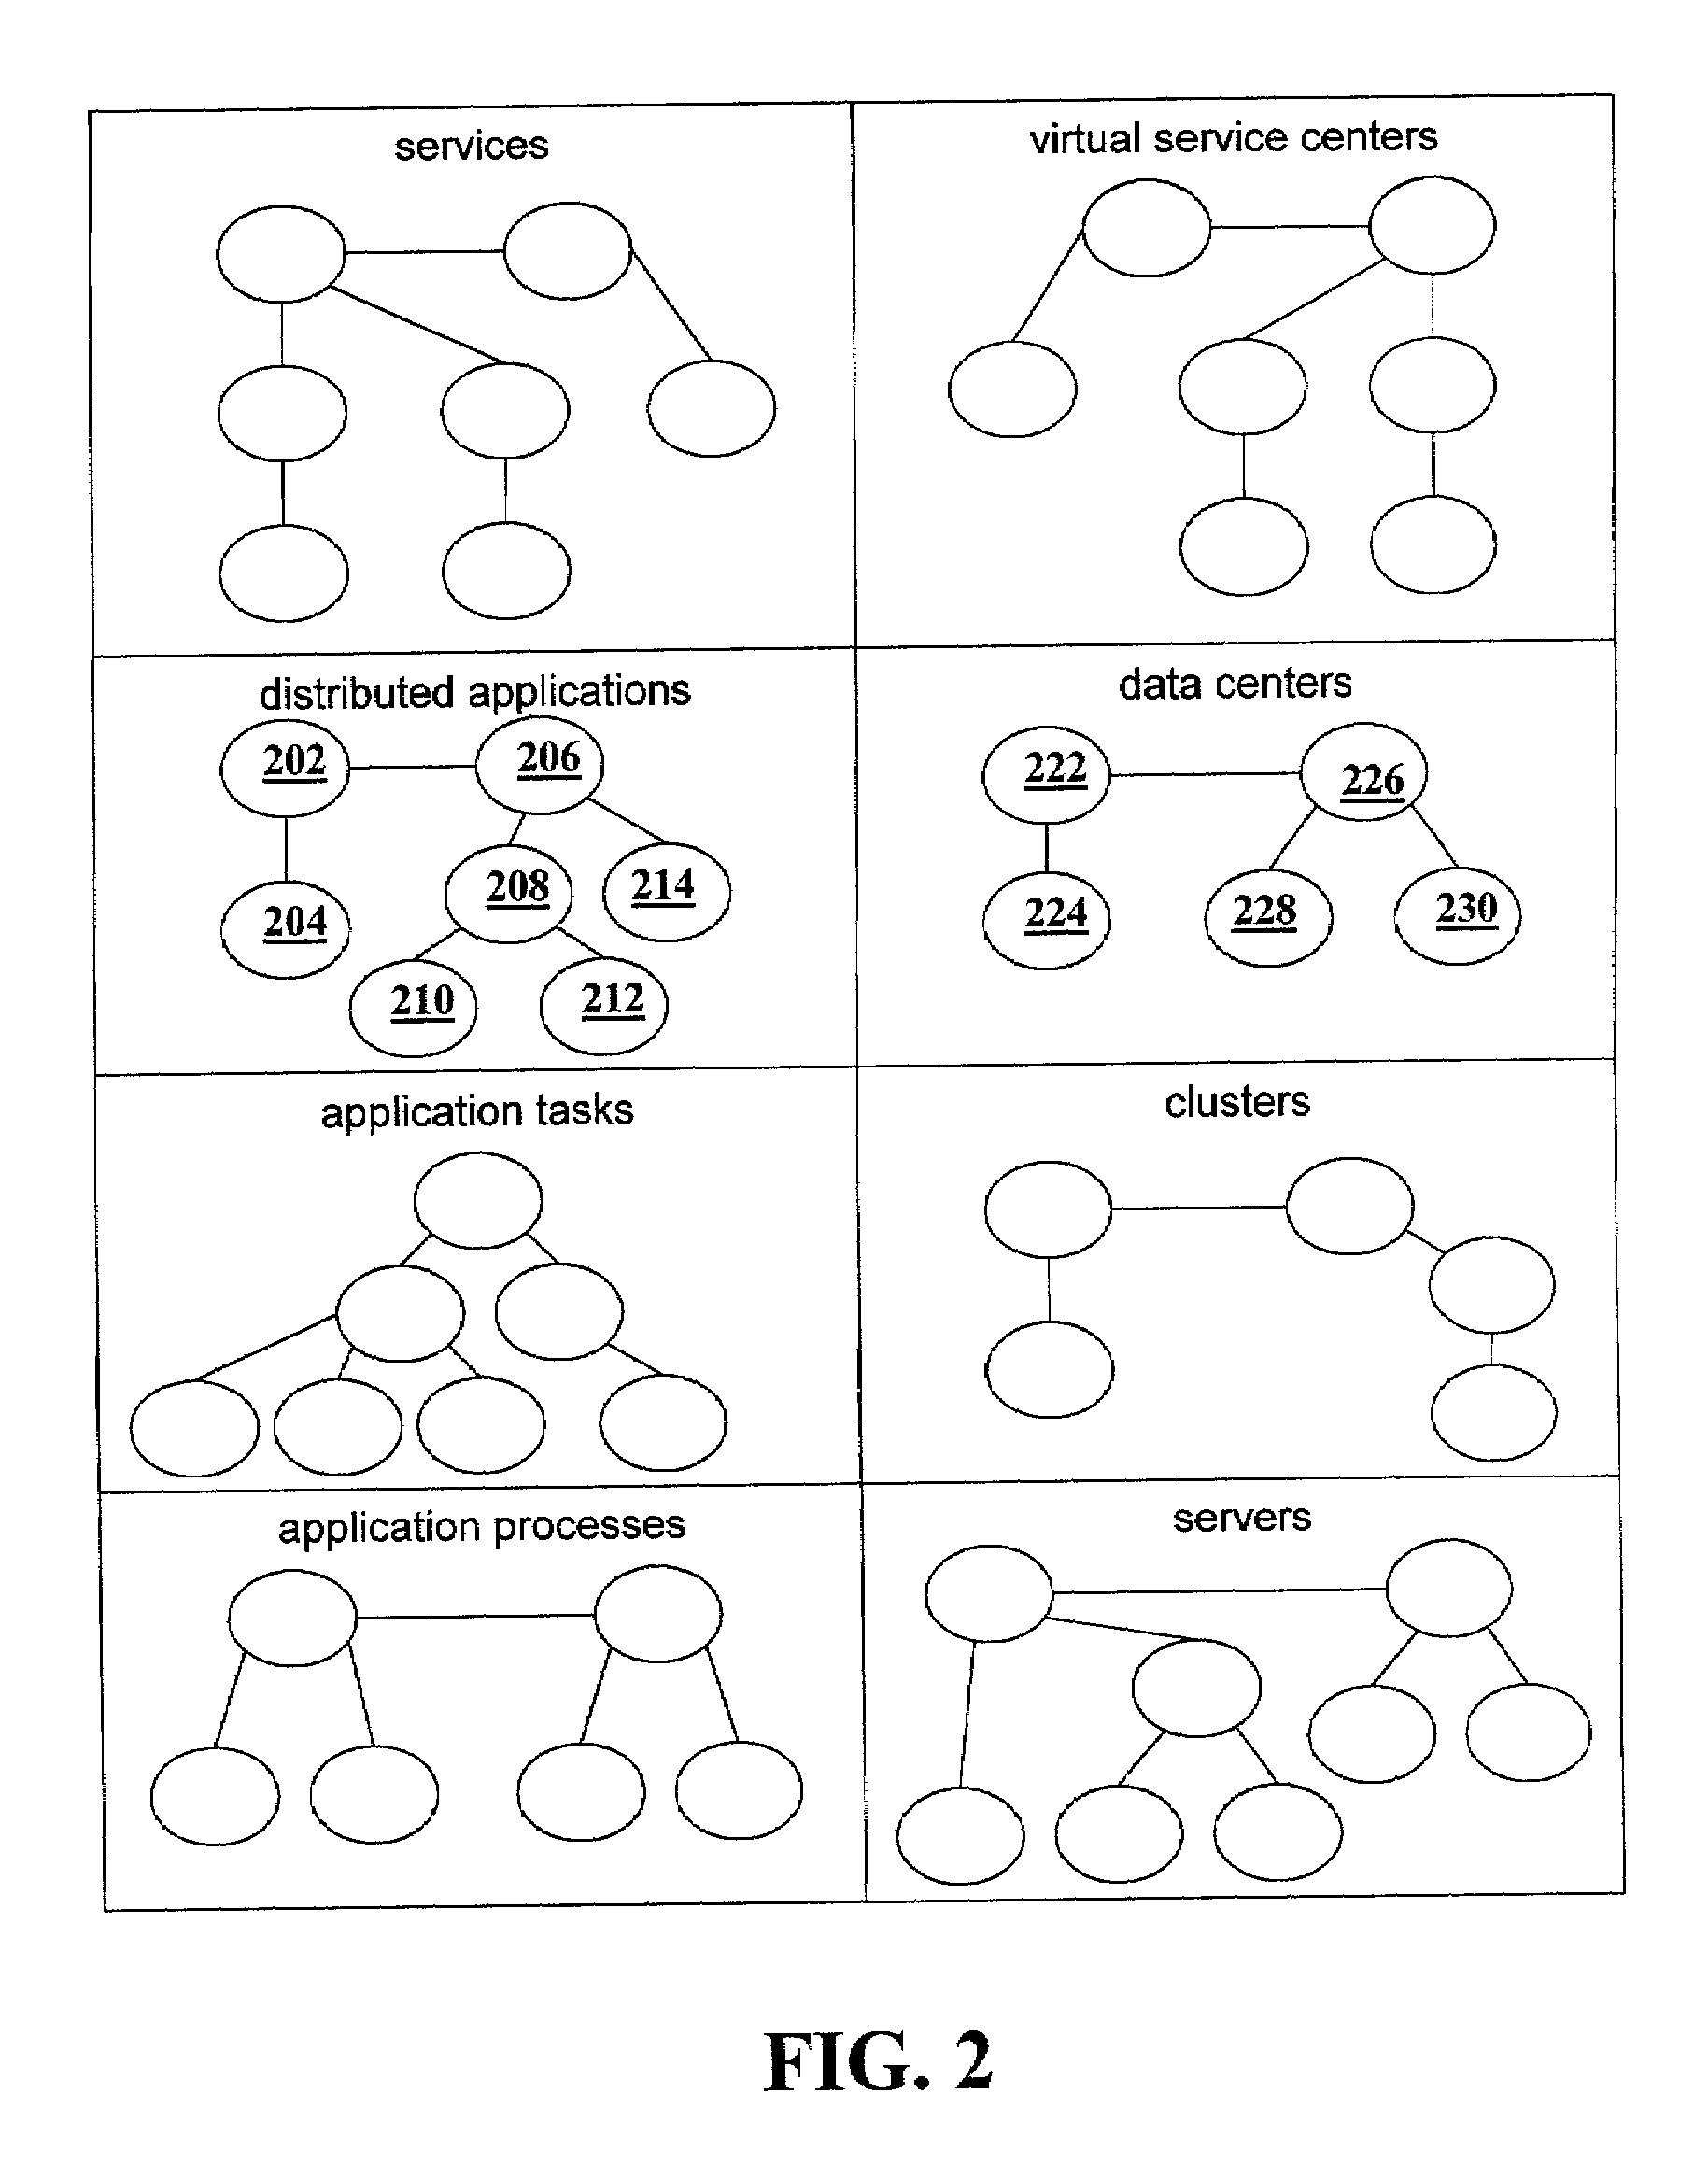 Method and framework for generating an optimized deployment of software applications in a distributed computing environment using layered model descriptions of services and servers